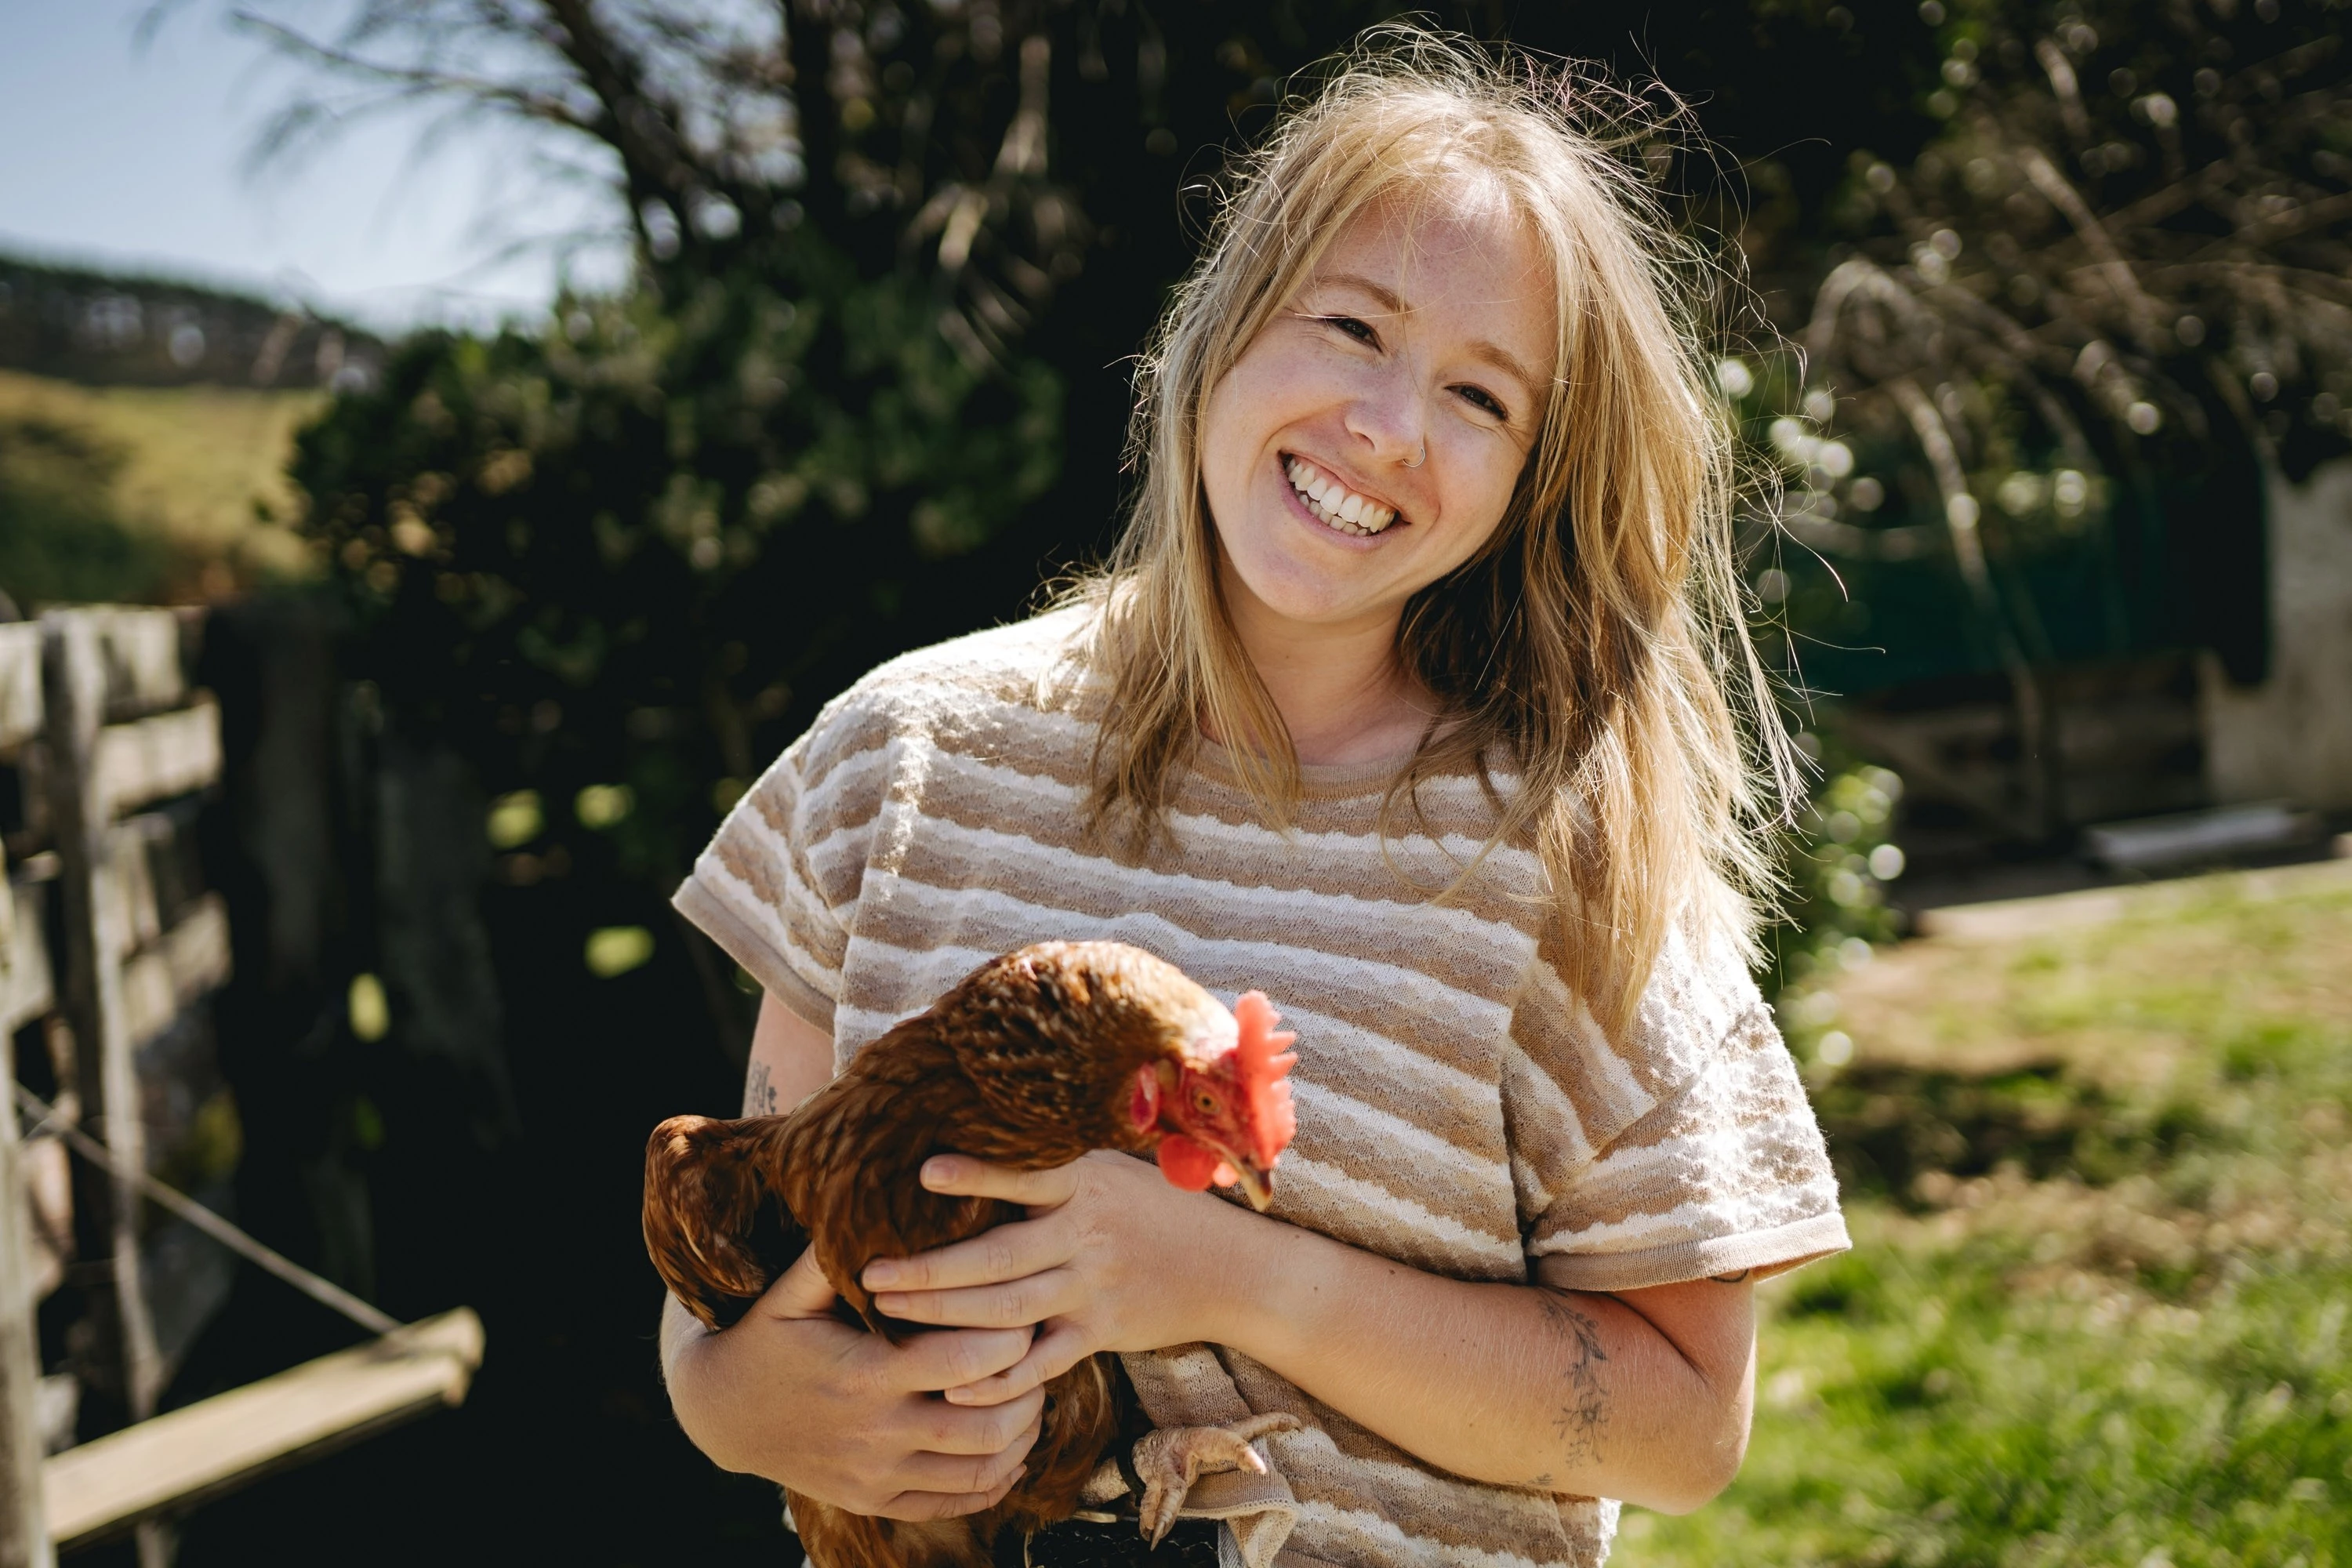 Urban farming: Everything you need to know about keeping chickens in New Zealand